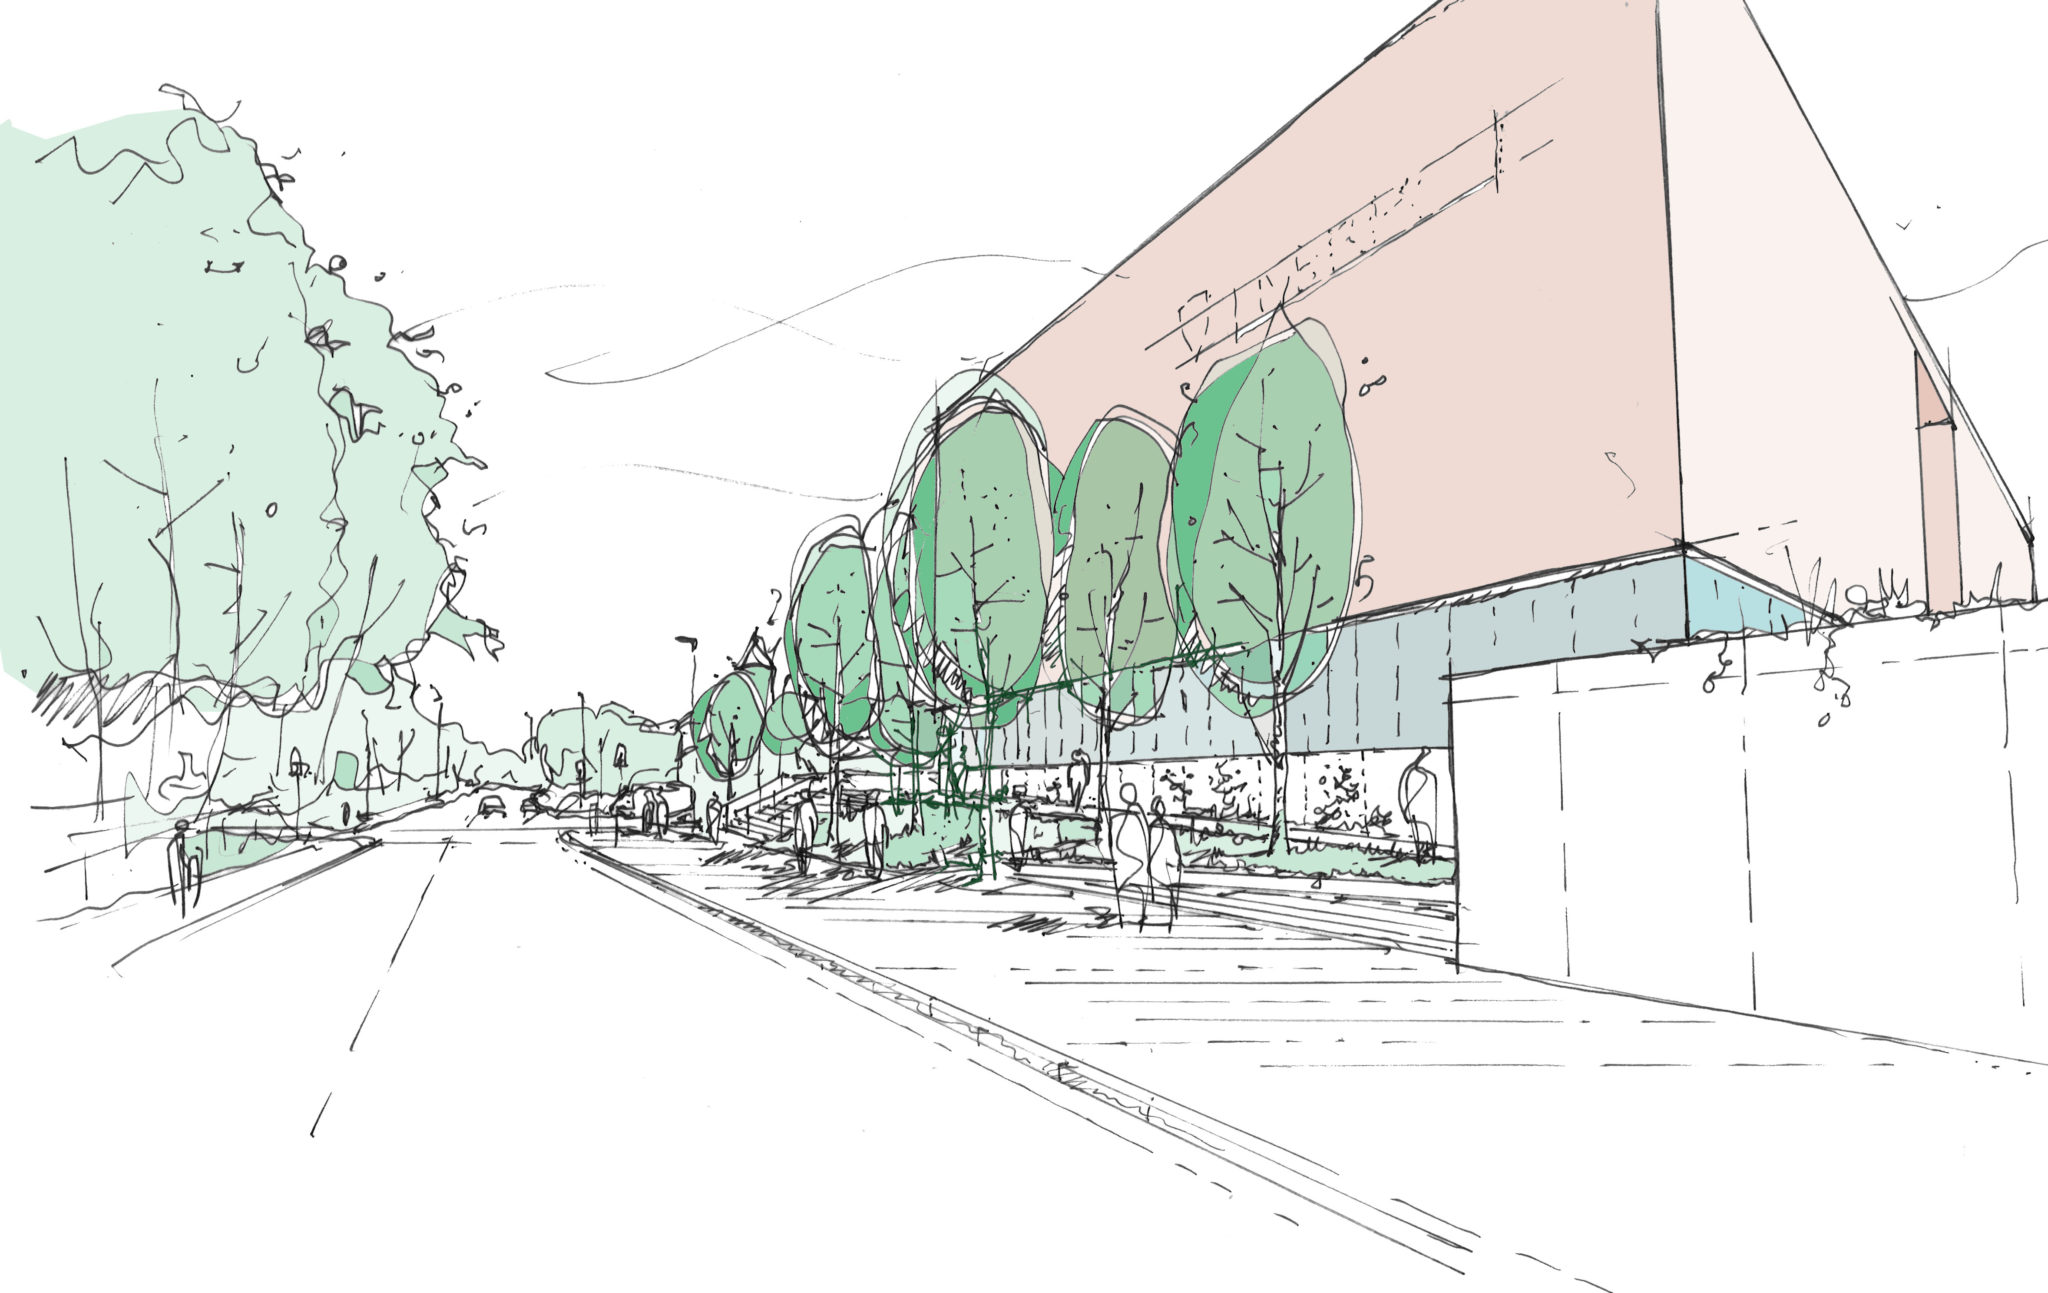 University of Liverpool Arts & Humanities Centre - Oxford Street sketch